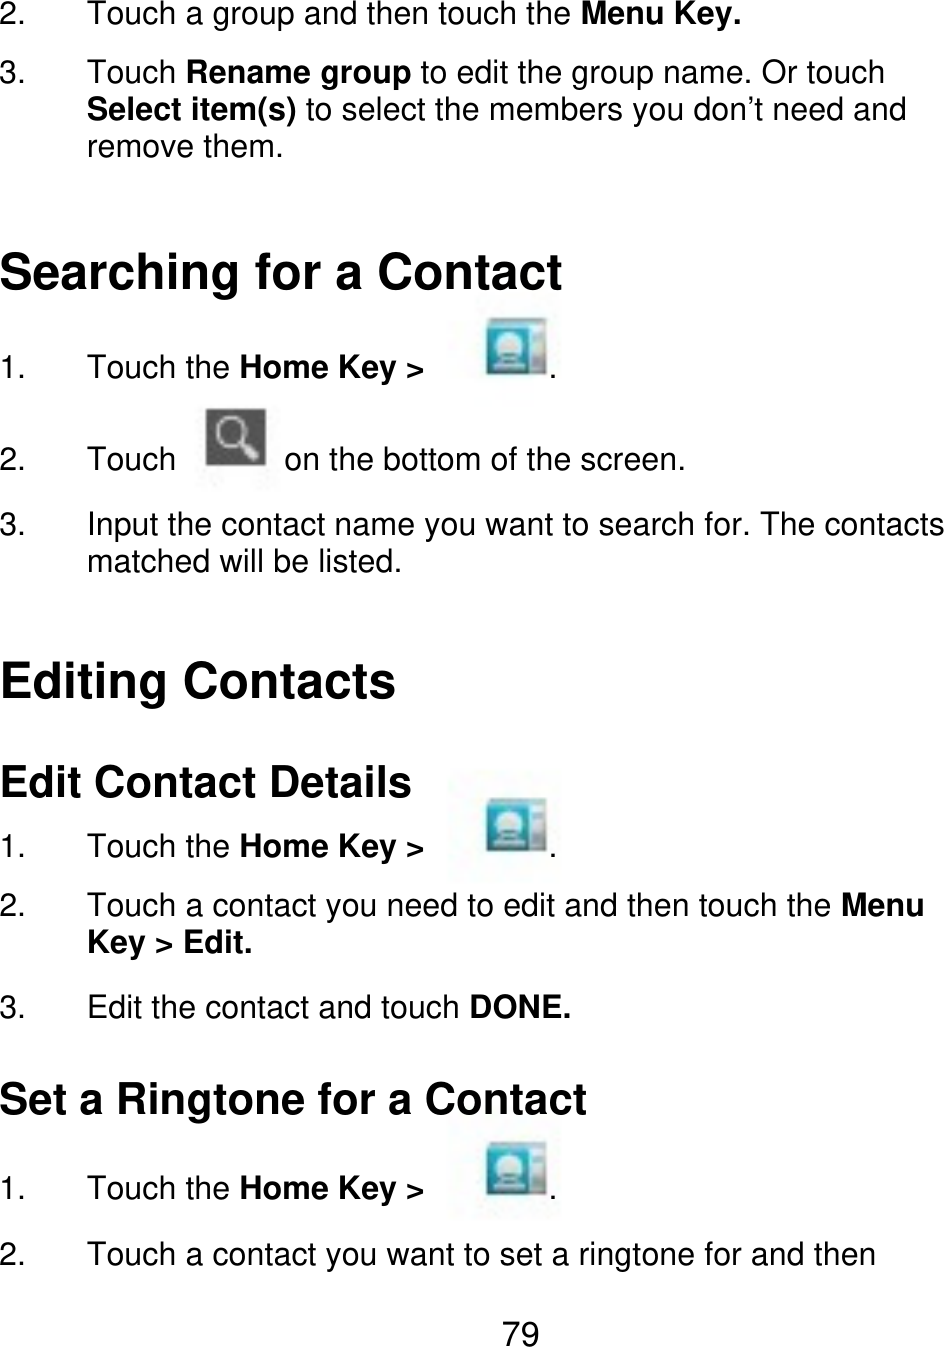 2. 3. Touch a group and then touch the Menu Key. Touch Rename group to edit the group name. Or touch Select item(s) to select the members you don’t need and remove them. Searching for a Contact 1. 2. 3. Touch the Home Key &gt; Touch . on the bottom of the screen. Input the contact name you want to search for. The contacts matched will be listed. Editing Contacts Edit Contact Details 1. 2. 3. Touch the Home Key &gt; . Touch a contact you need to edit and then touch the Menu Key &gt; Edit. Edit the contact and touch DONE. Set a Ringtone for a Contact 1. 2. Touch the Home Key &gt; . Touch a contact you want to set a ringtone for and then 79 